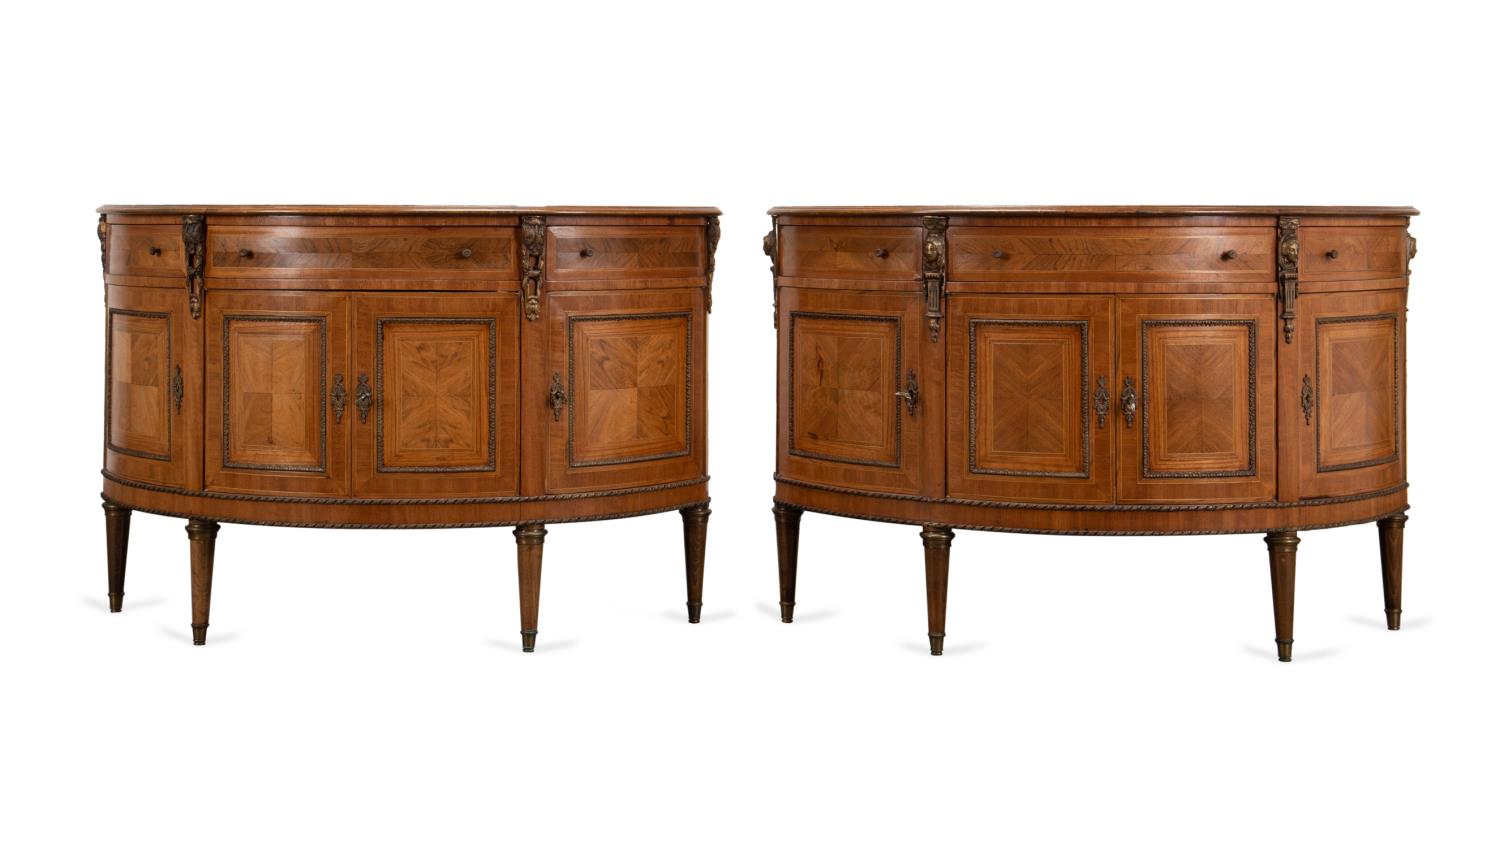 PAIR NEOCLASSICAL STYLE DEMILUNE 3cd179